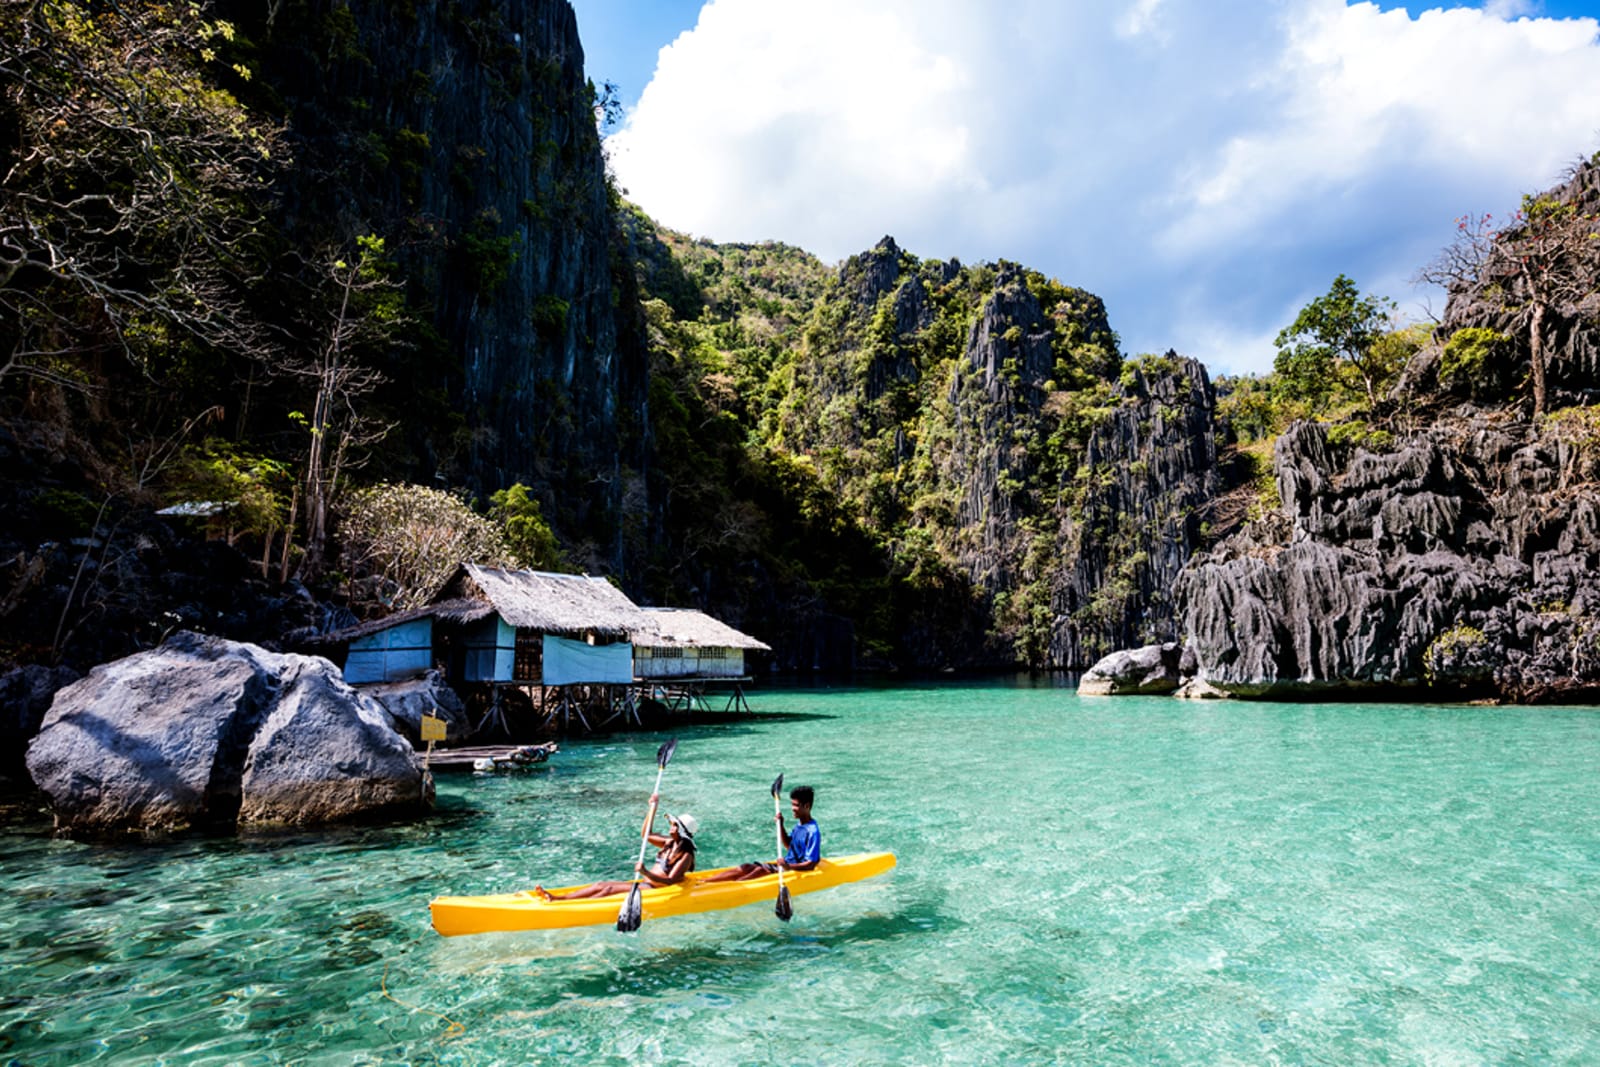 Two people in a kayak, exploring the islands in the Philippines